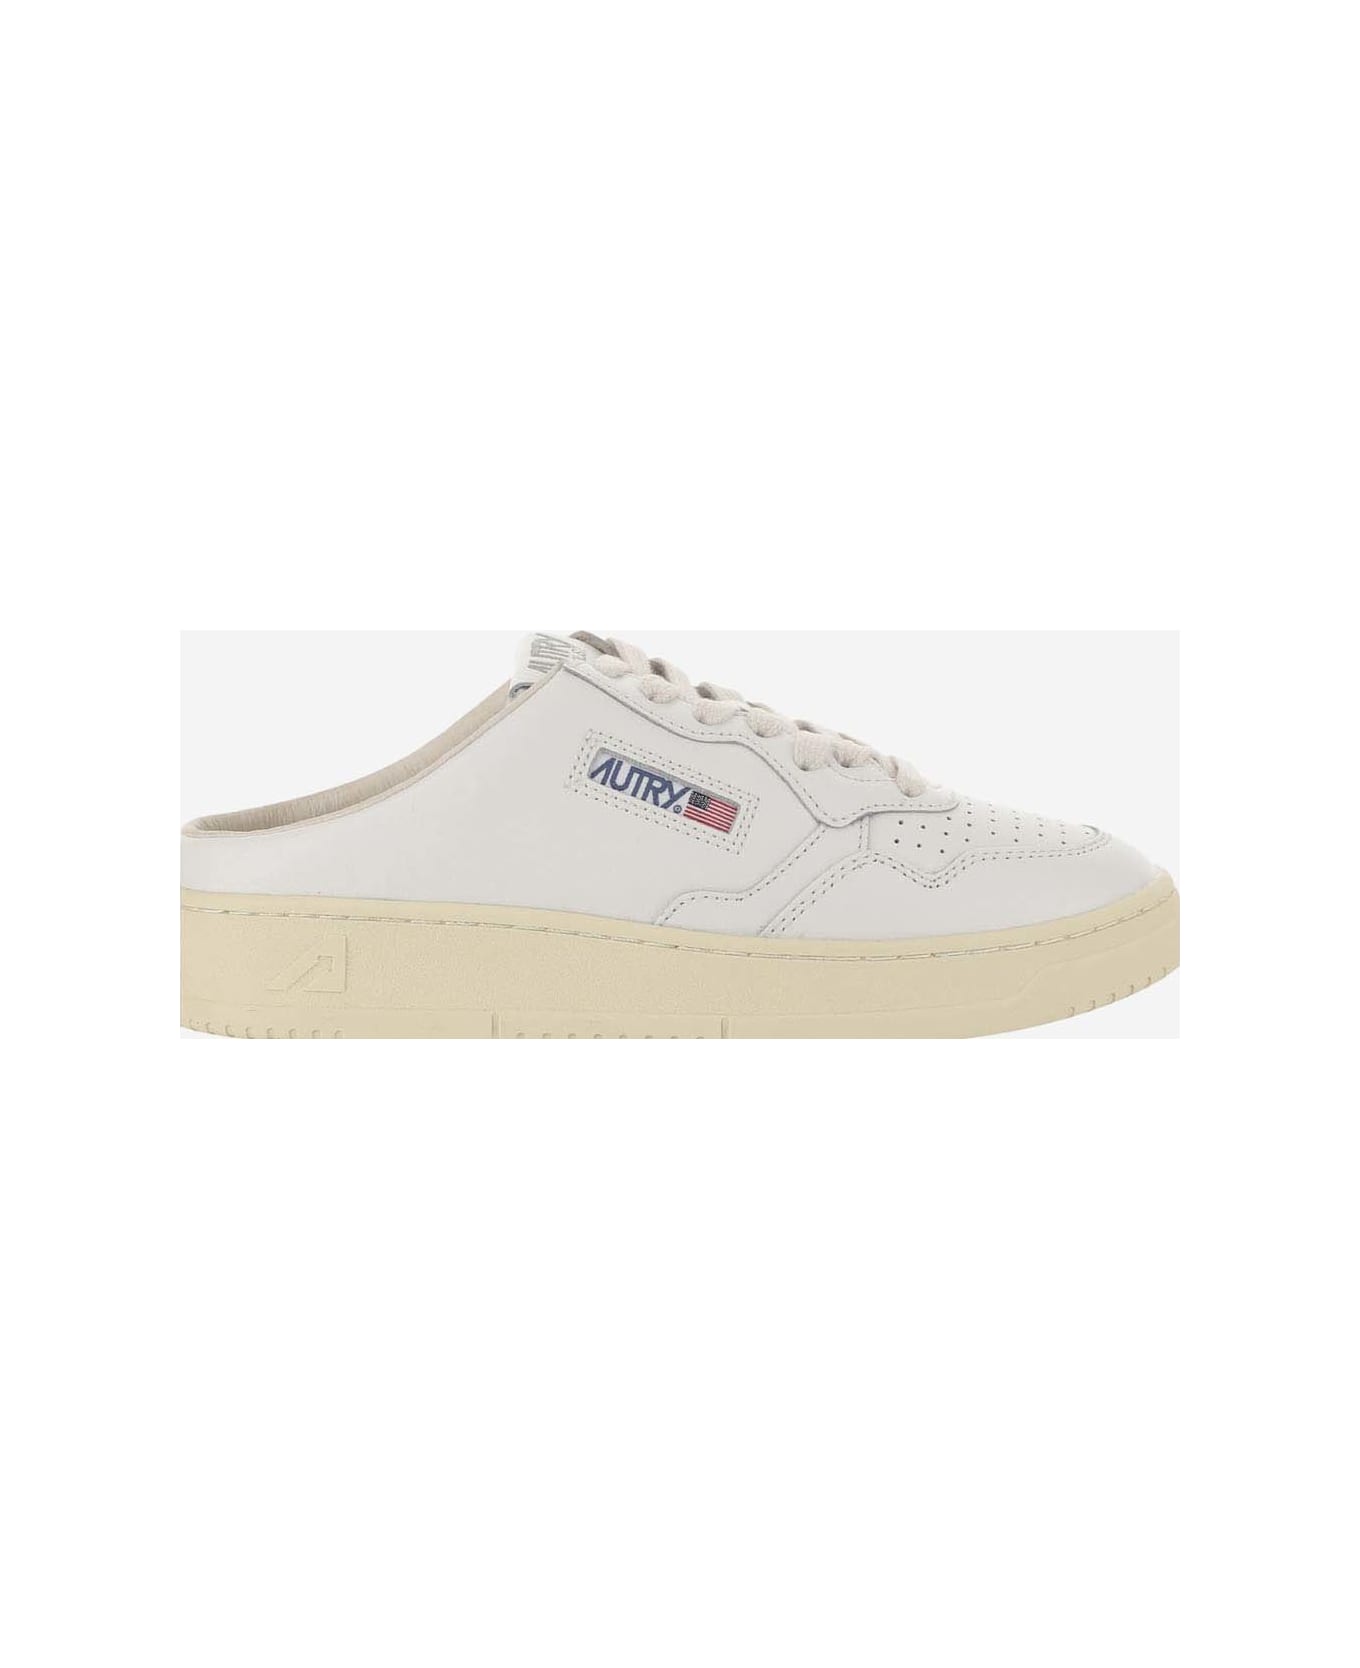 Autry Medalist Mule Low Leather Sneakers - Wht/wht スニーカー